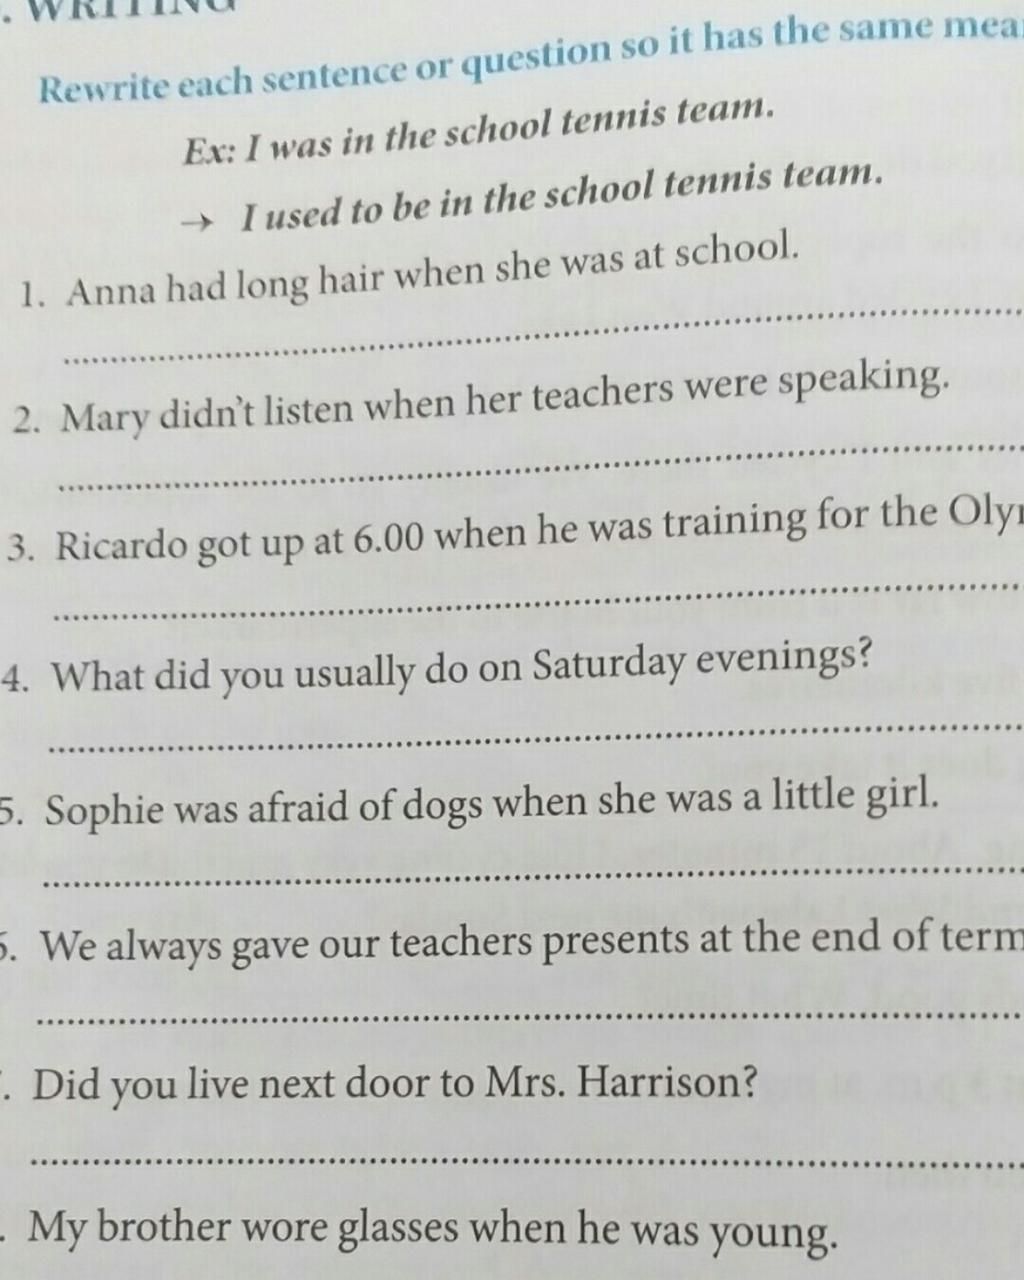 Rewrite each sentence or question so it has the same mear Ex: I was in the  school tennis team. » I used to be in the scho0ol tennis team. 1. Anna had  long